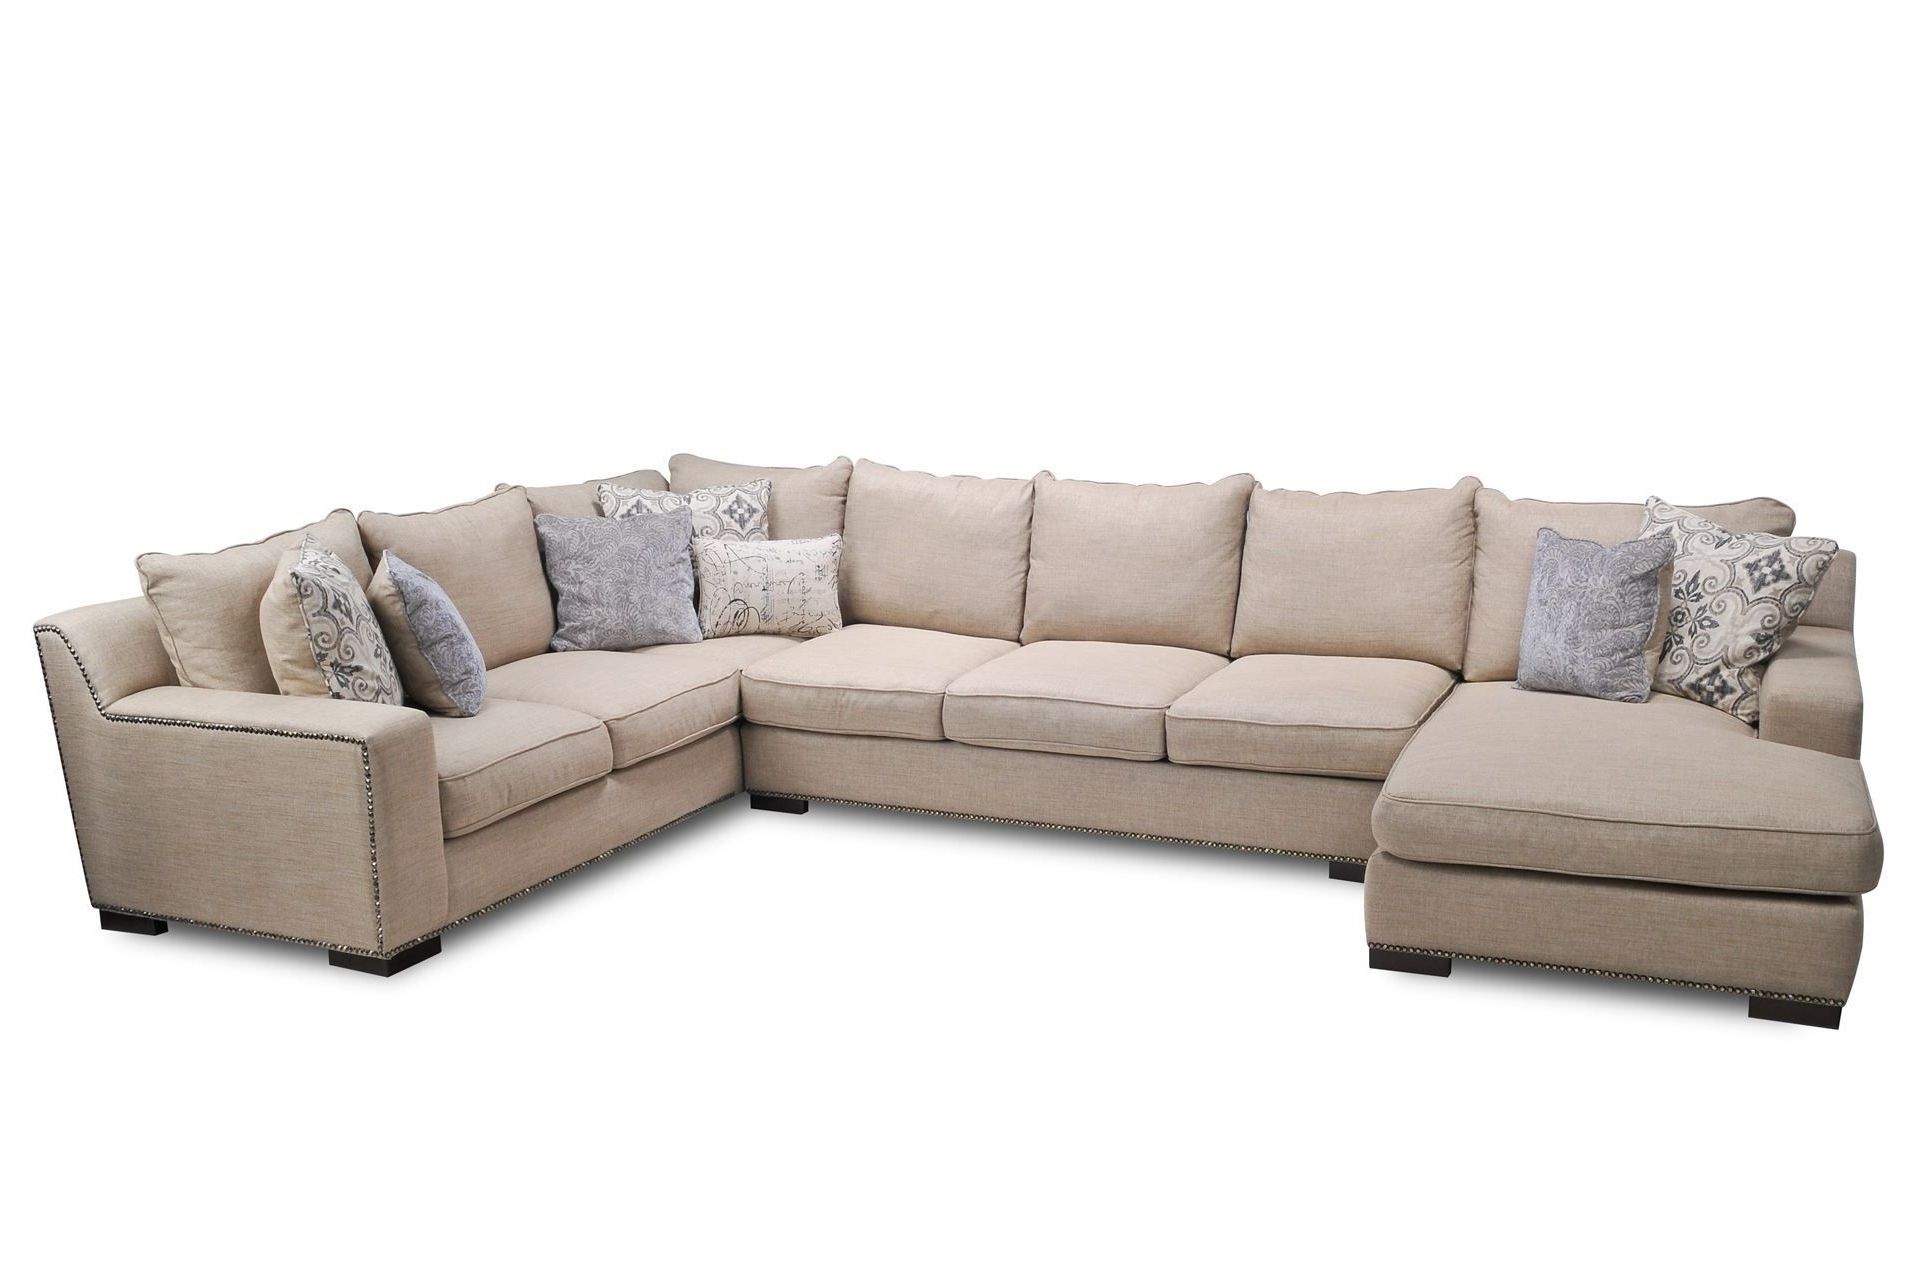 Way Too Big But Liking This Style. Sultan 3 Piece Sectional Regarding Famous Living Spaces Sectional Sofas (Photo 12 of 15)